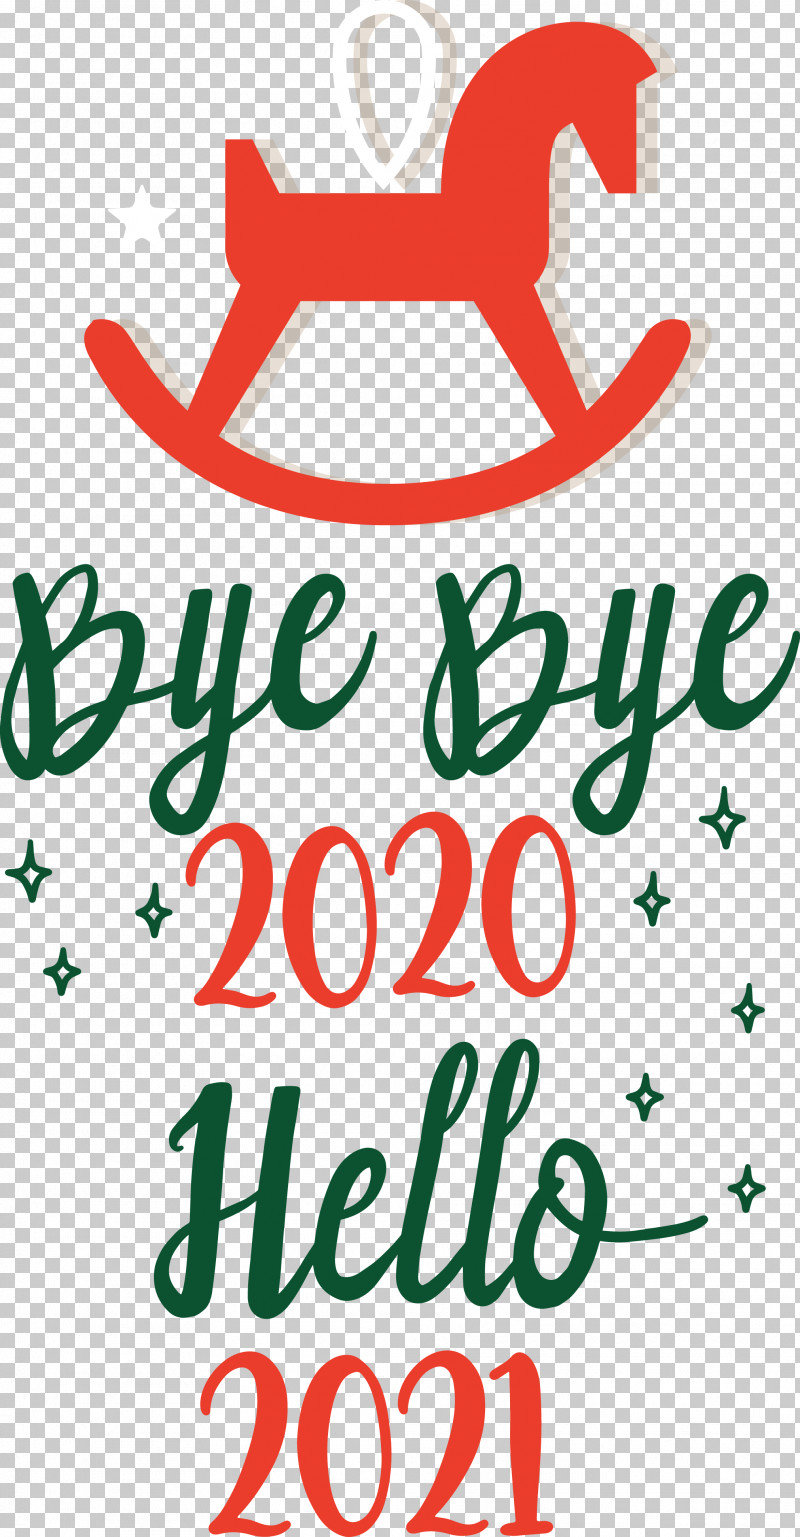 Hello 2021 Year Bye Bye 2020 Year PNG, Clipart, Bye Bye 2020 Year, Flower, Geometry, Hello 2021 Year, Line Free PNG Download